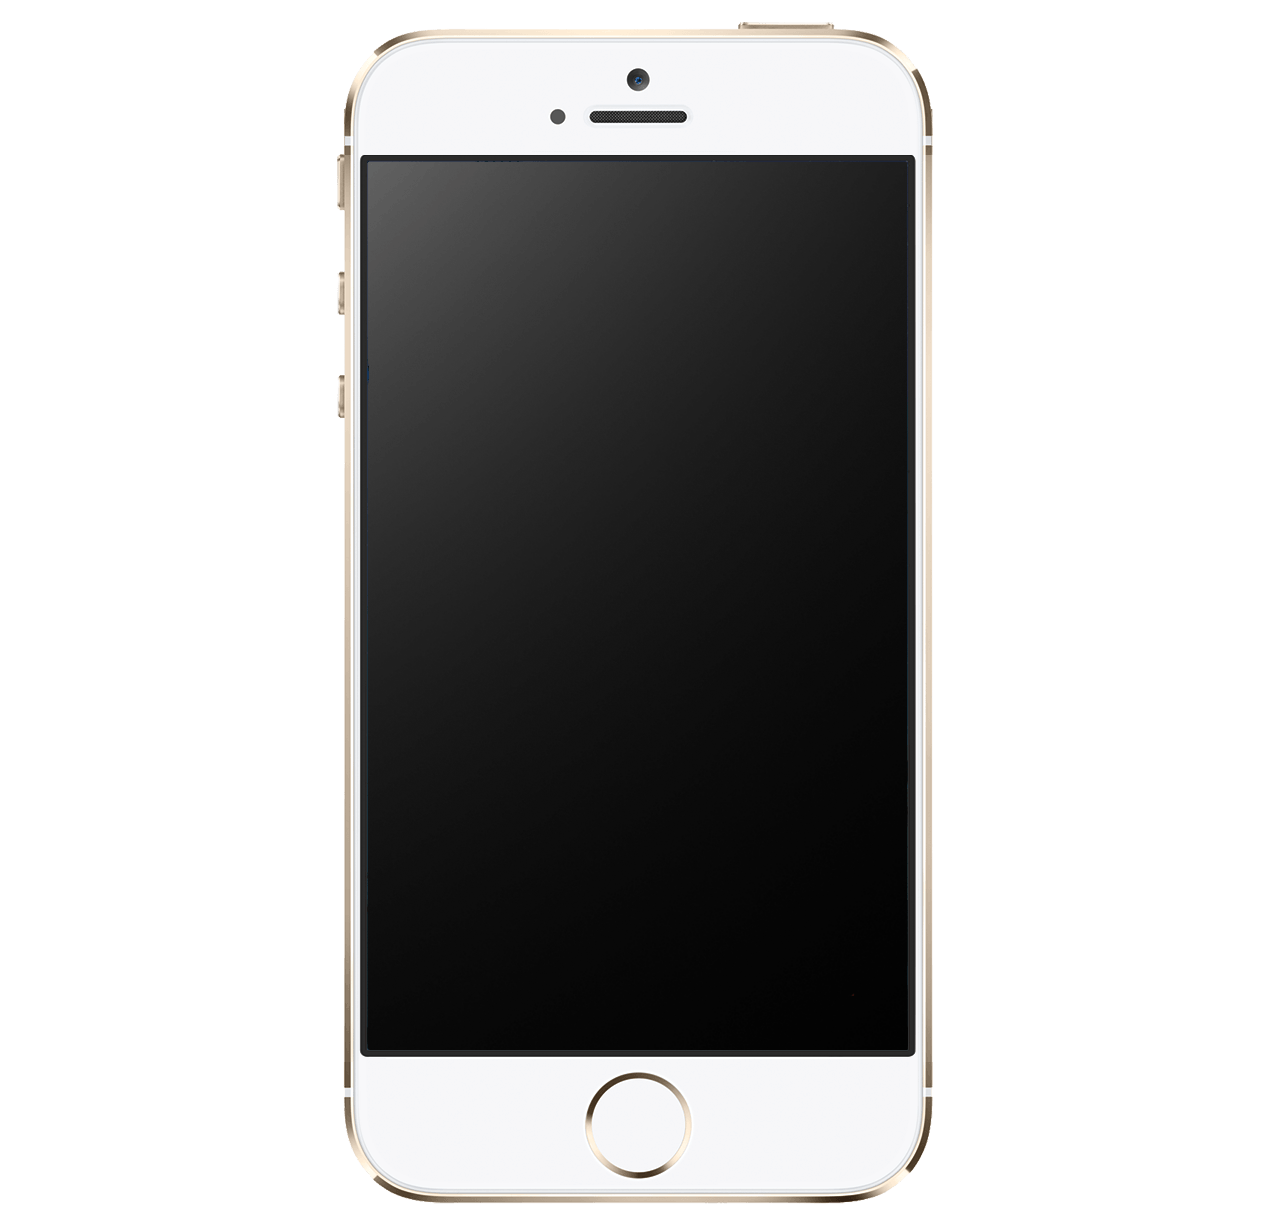 Icon Phones Gadgets Sim Iphone PNG